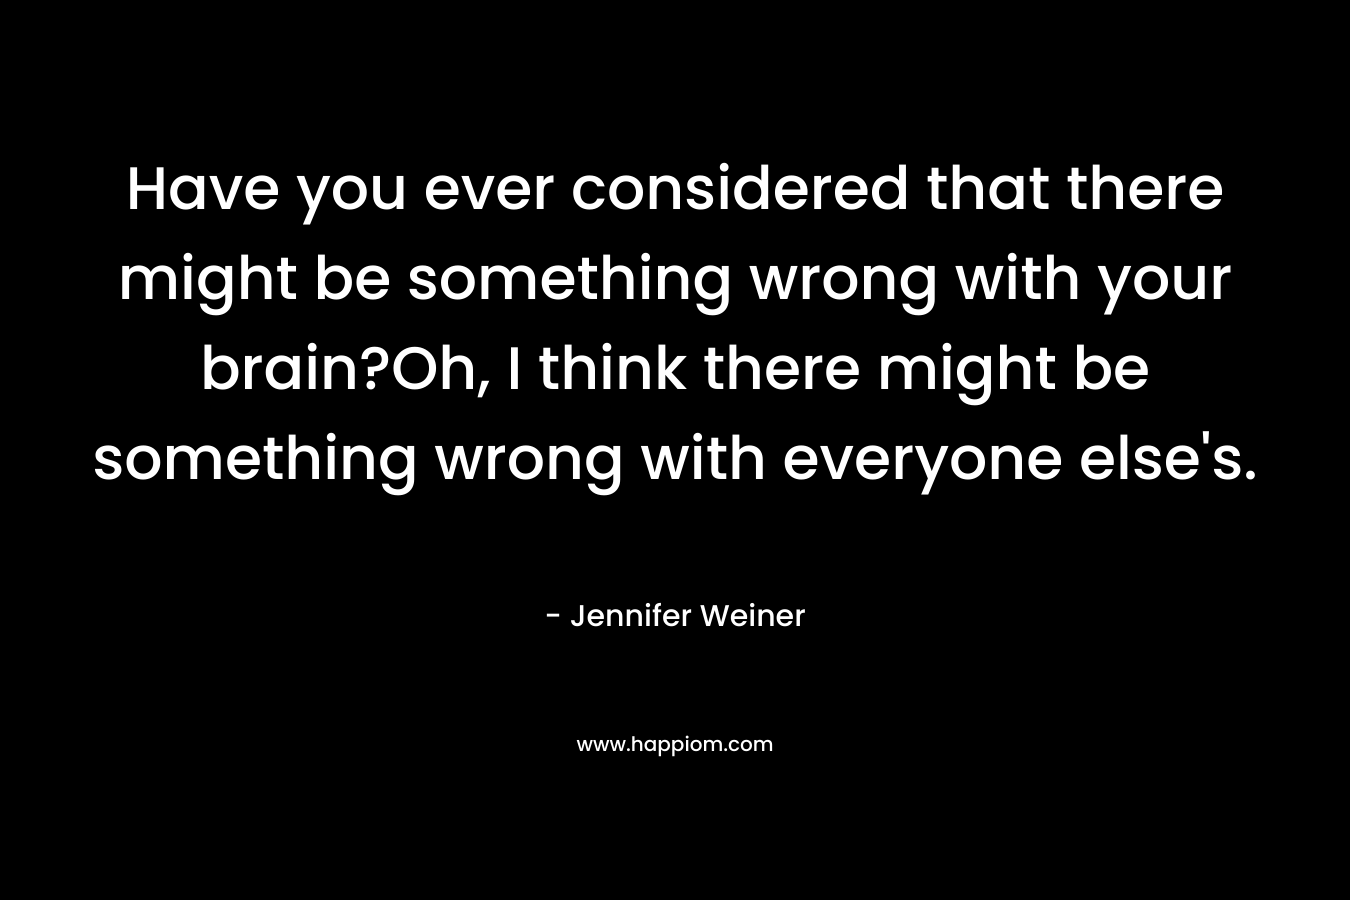 Have you ever considered that there might be something wrong with your brain?Oh, I think there might be something wrong with everyone else’s. – Jennifer Weiner